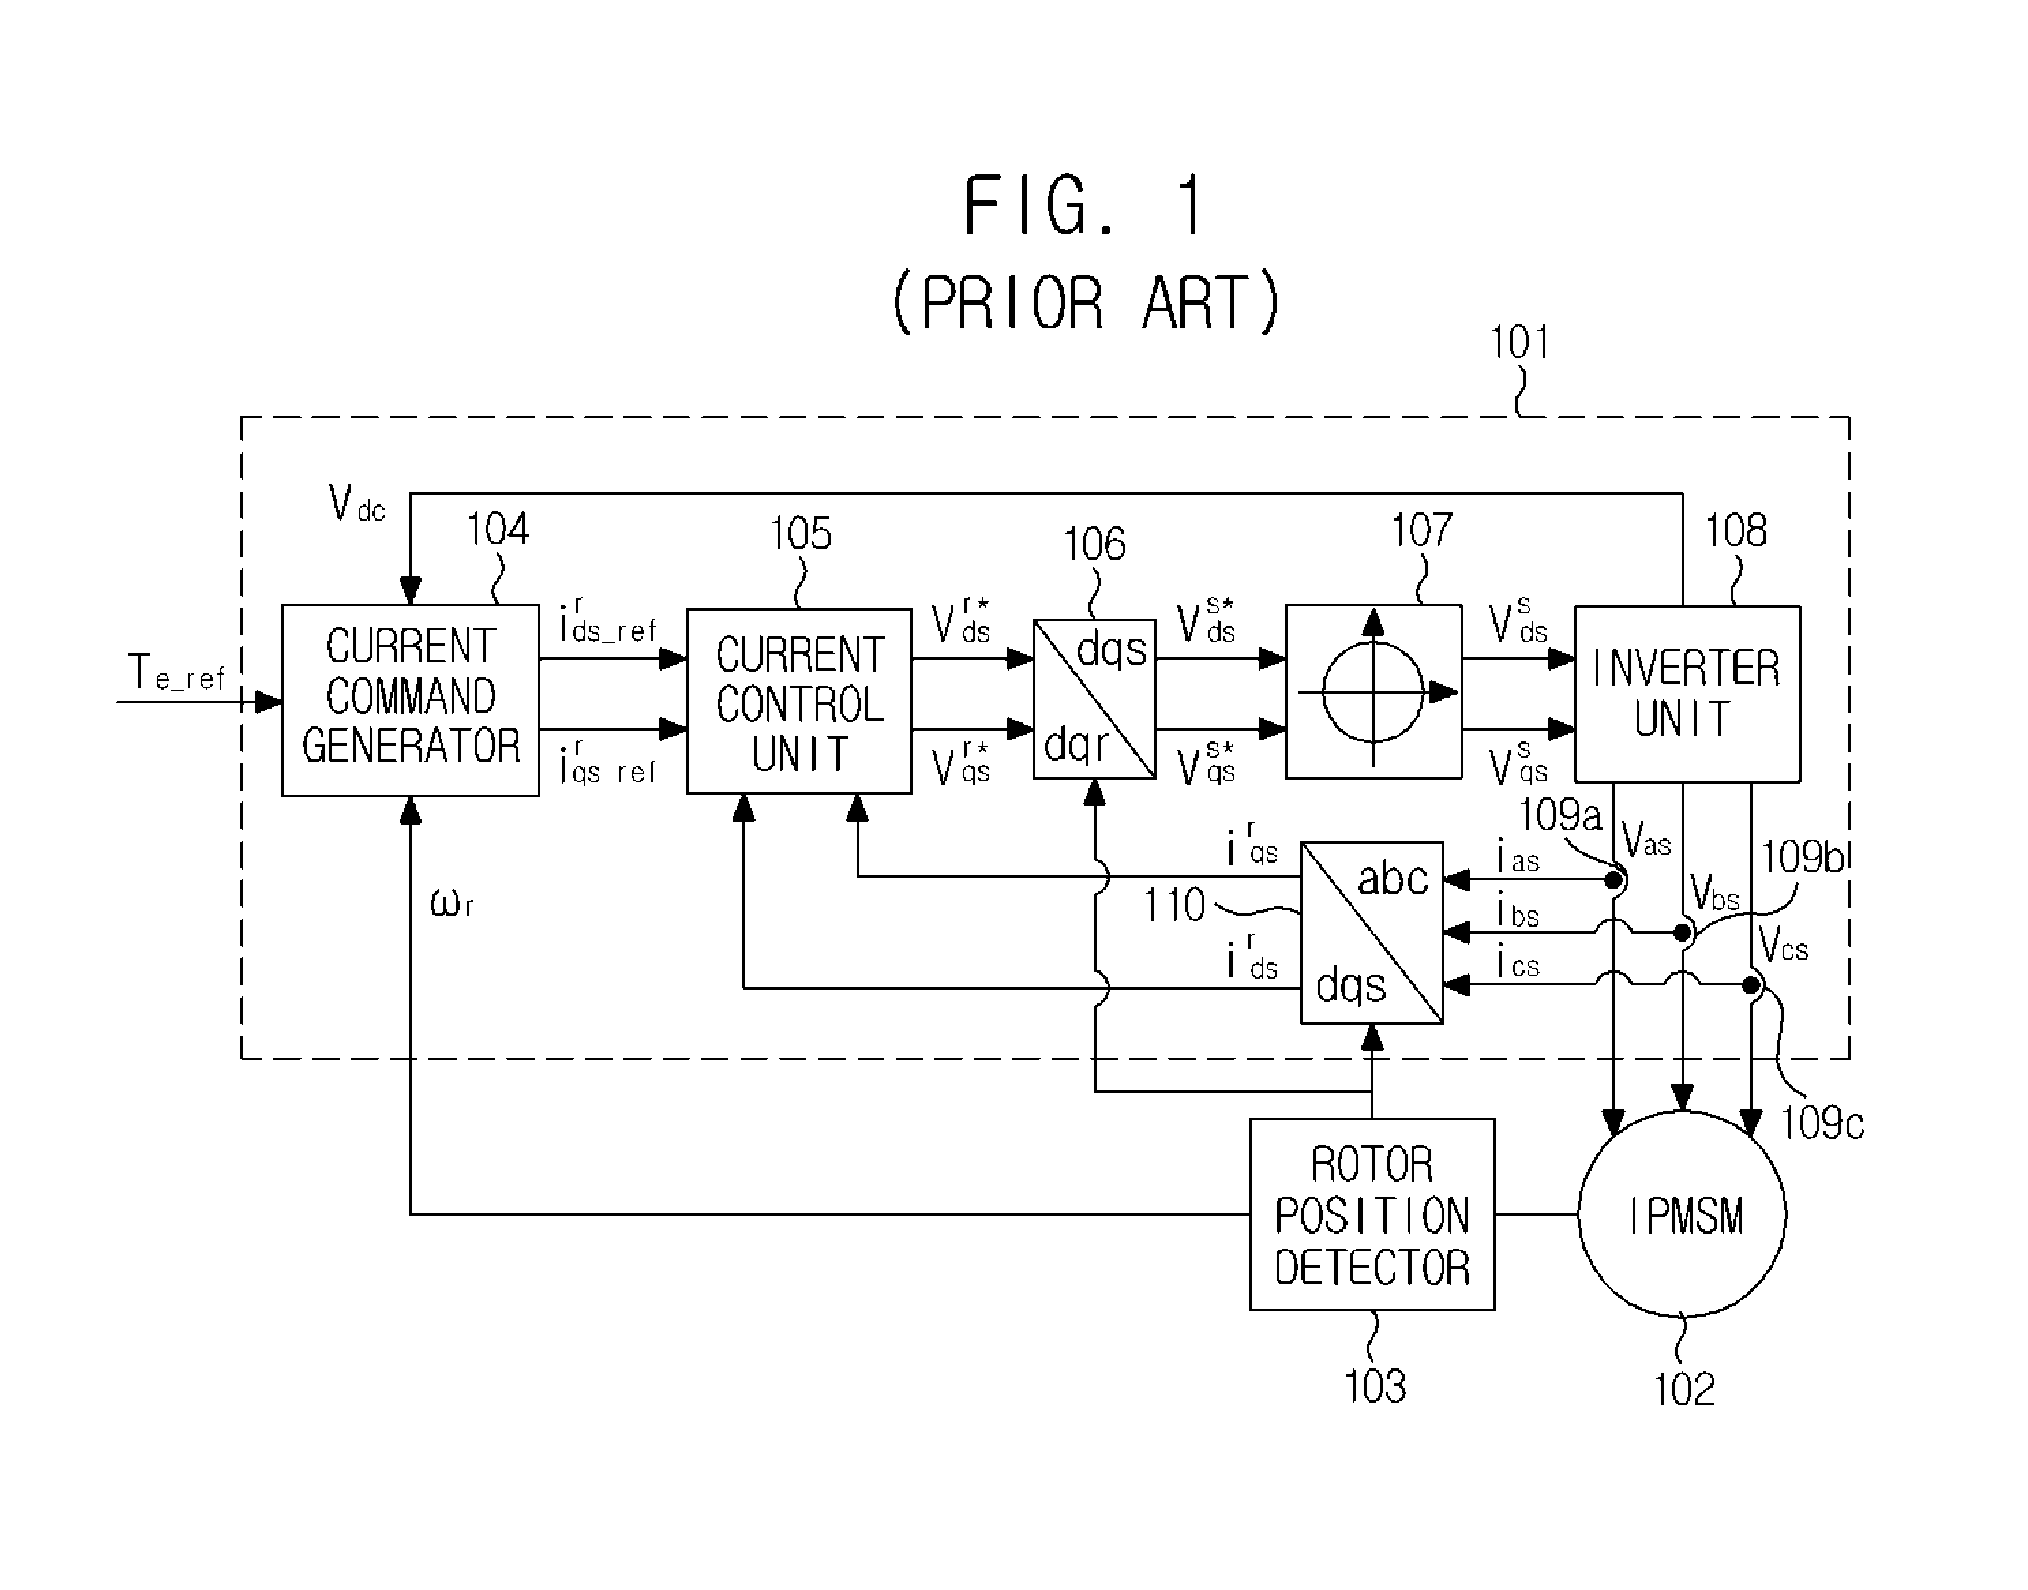 Apparatus for operating interior permanent magnet synchronous motor